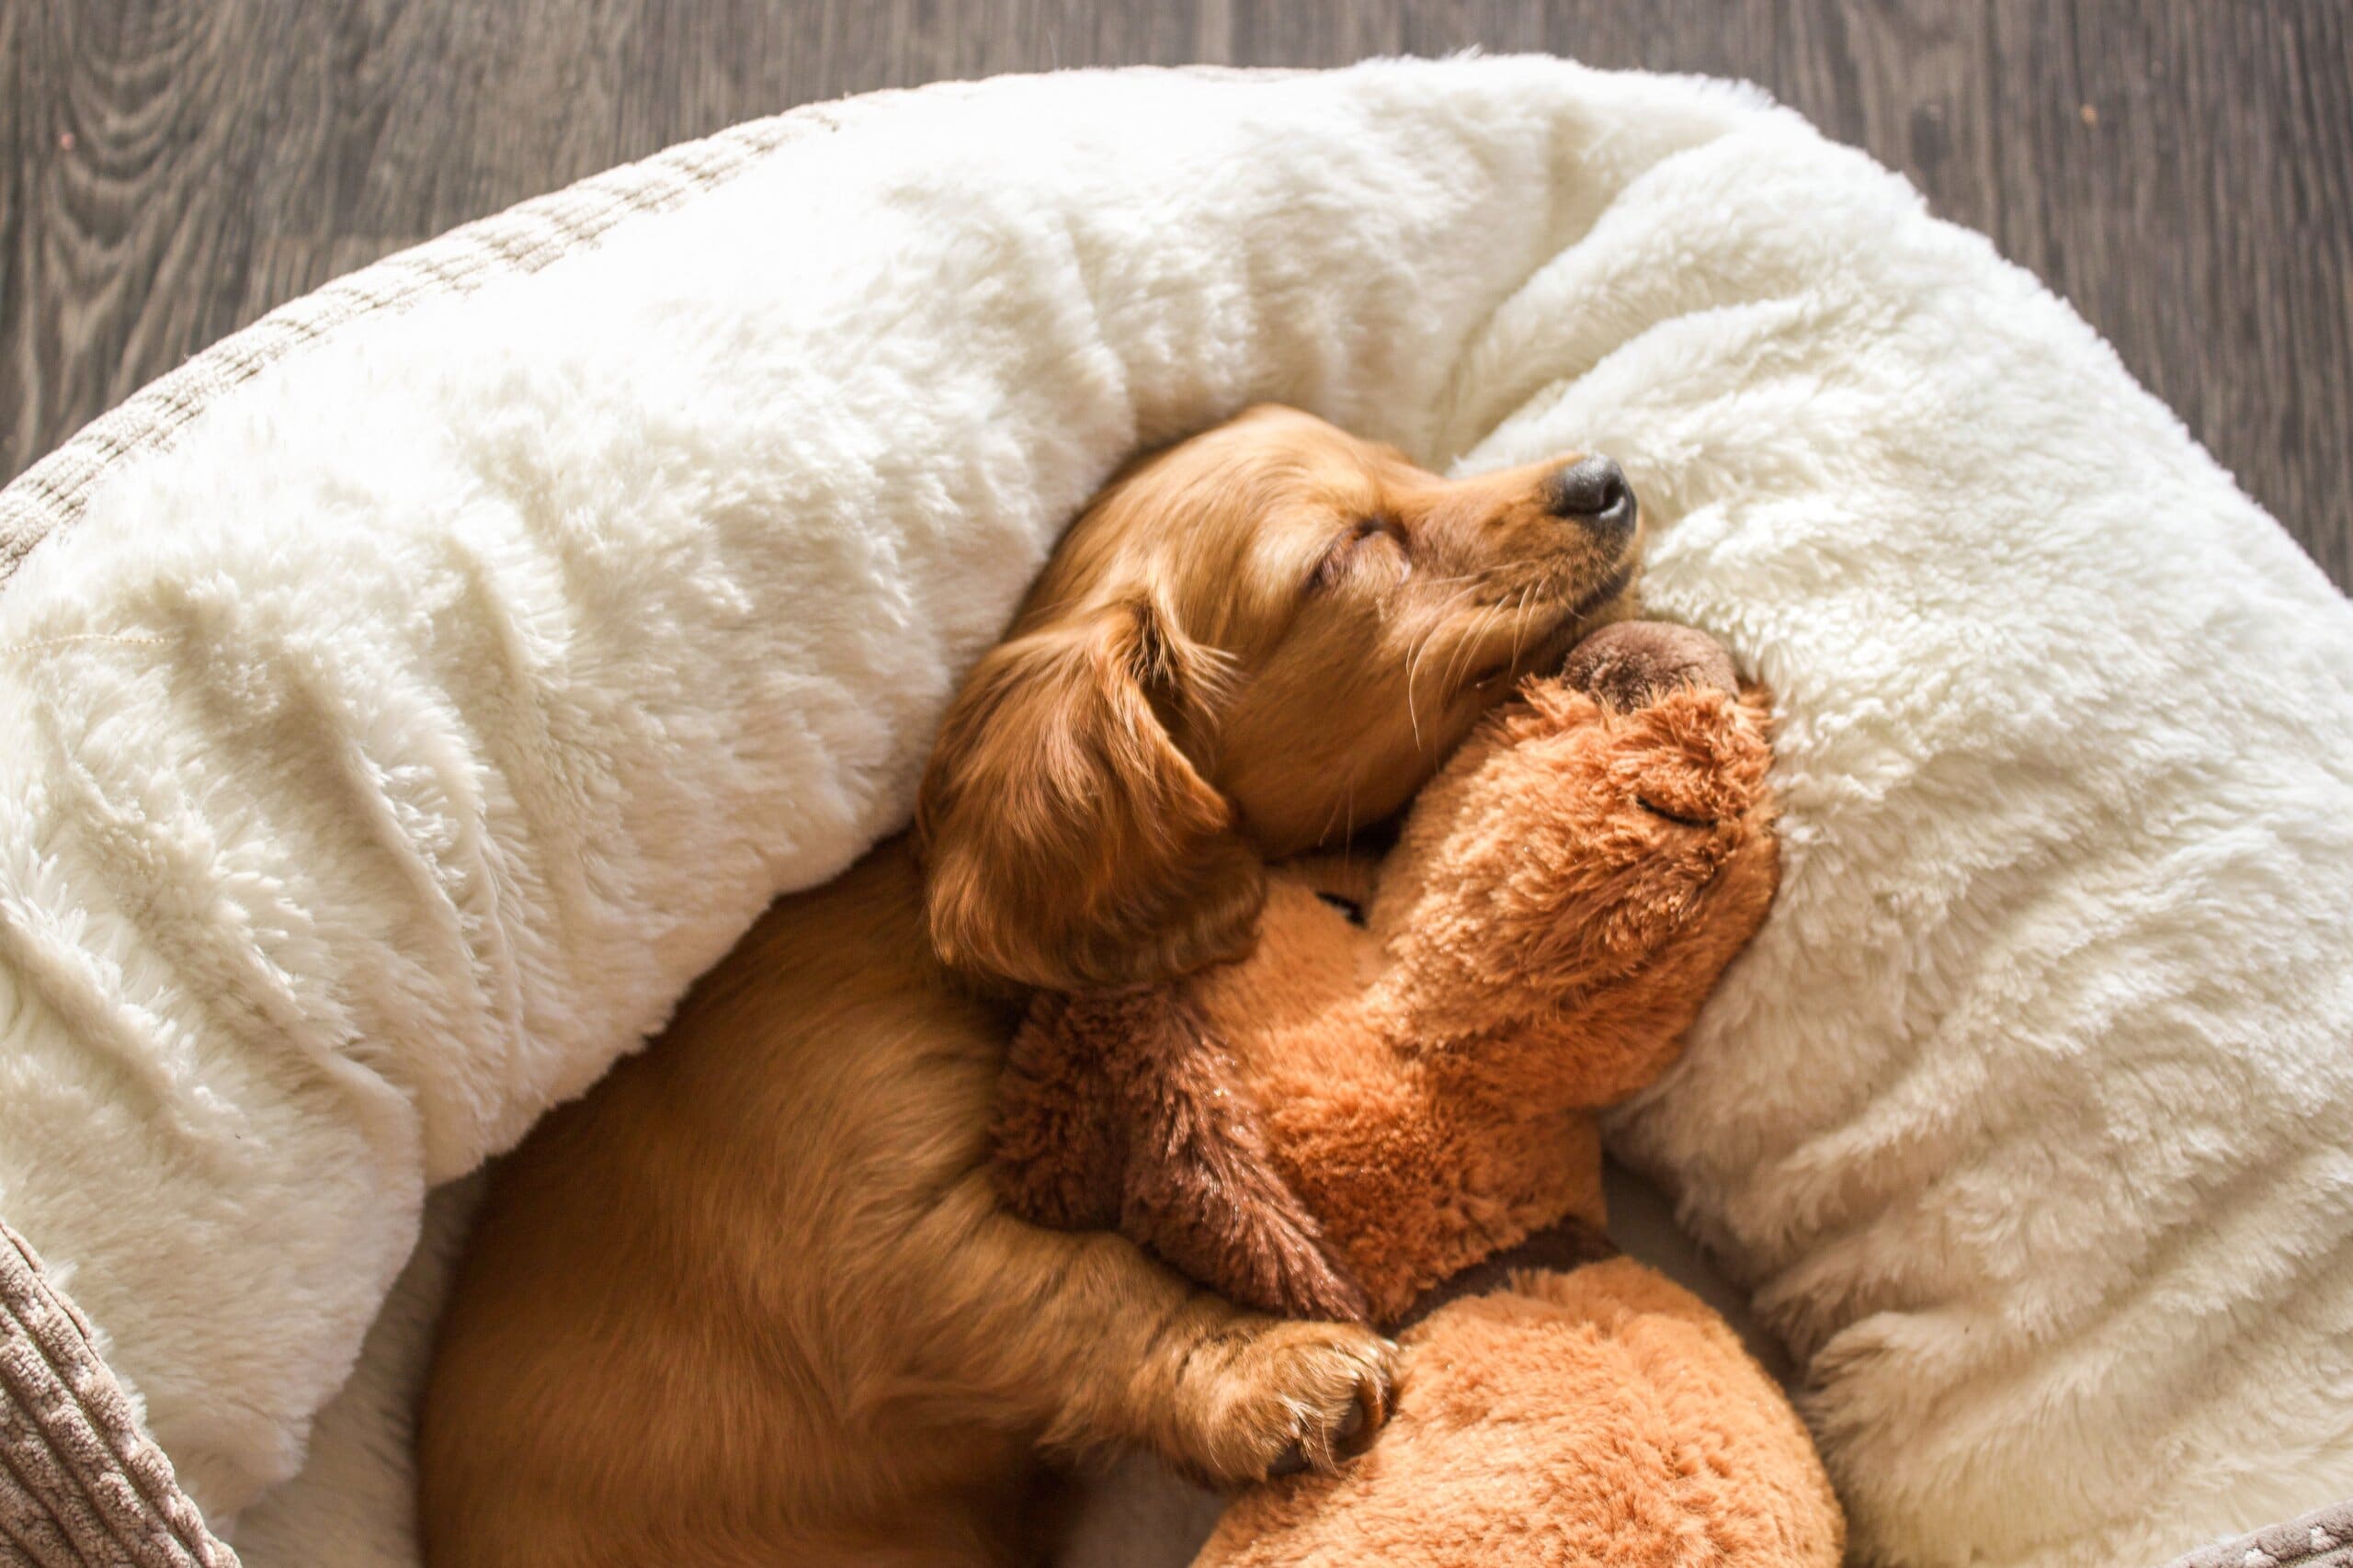 A puppy sleeping in its bed with a teddy.